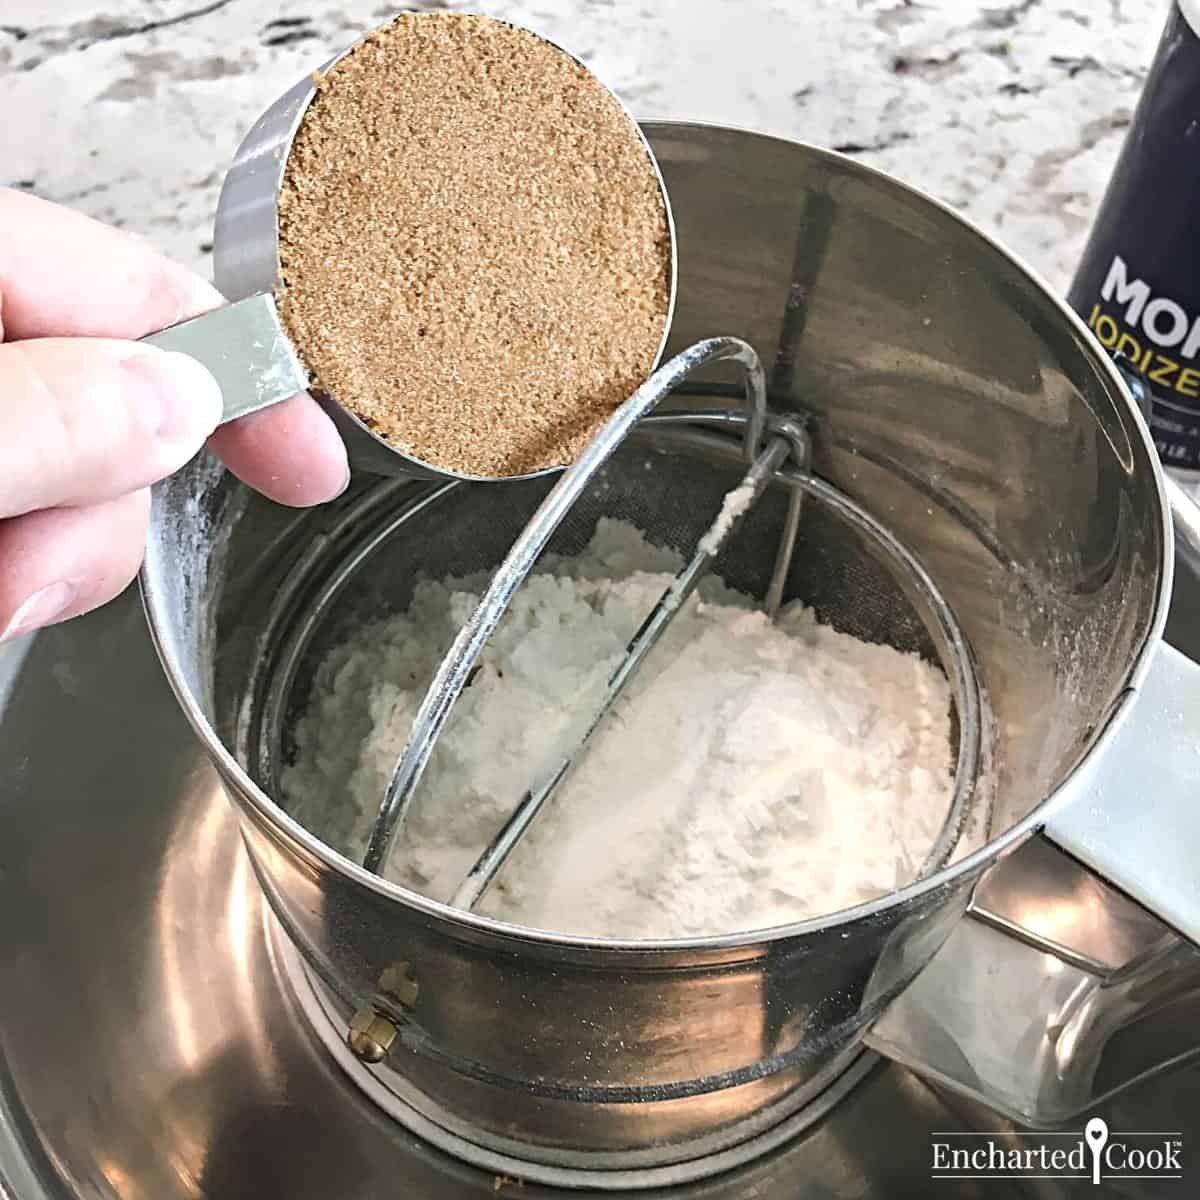 Brown sugar is fully packed into a measuring cup and added to the dry ingredients in a large sifter.